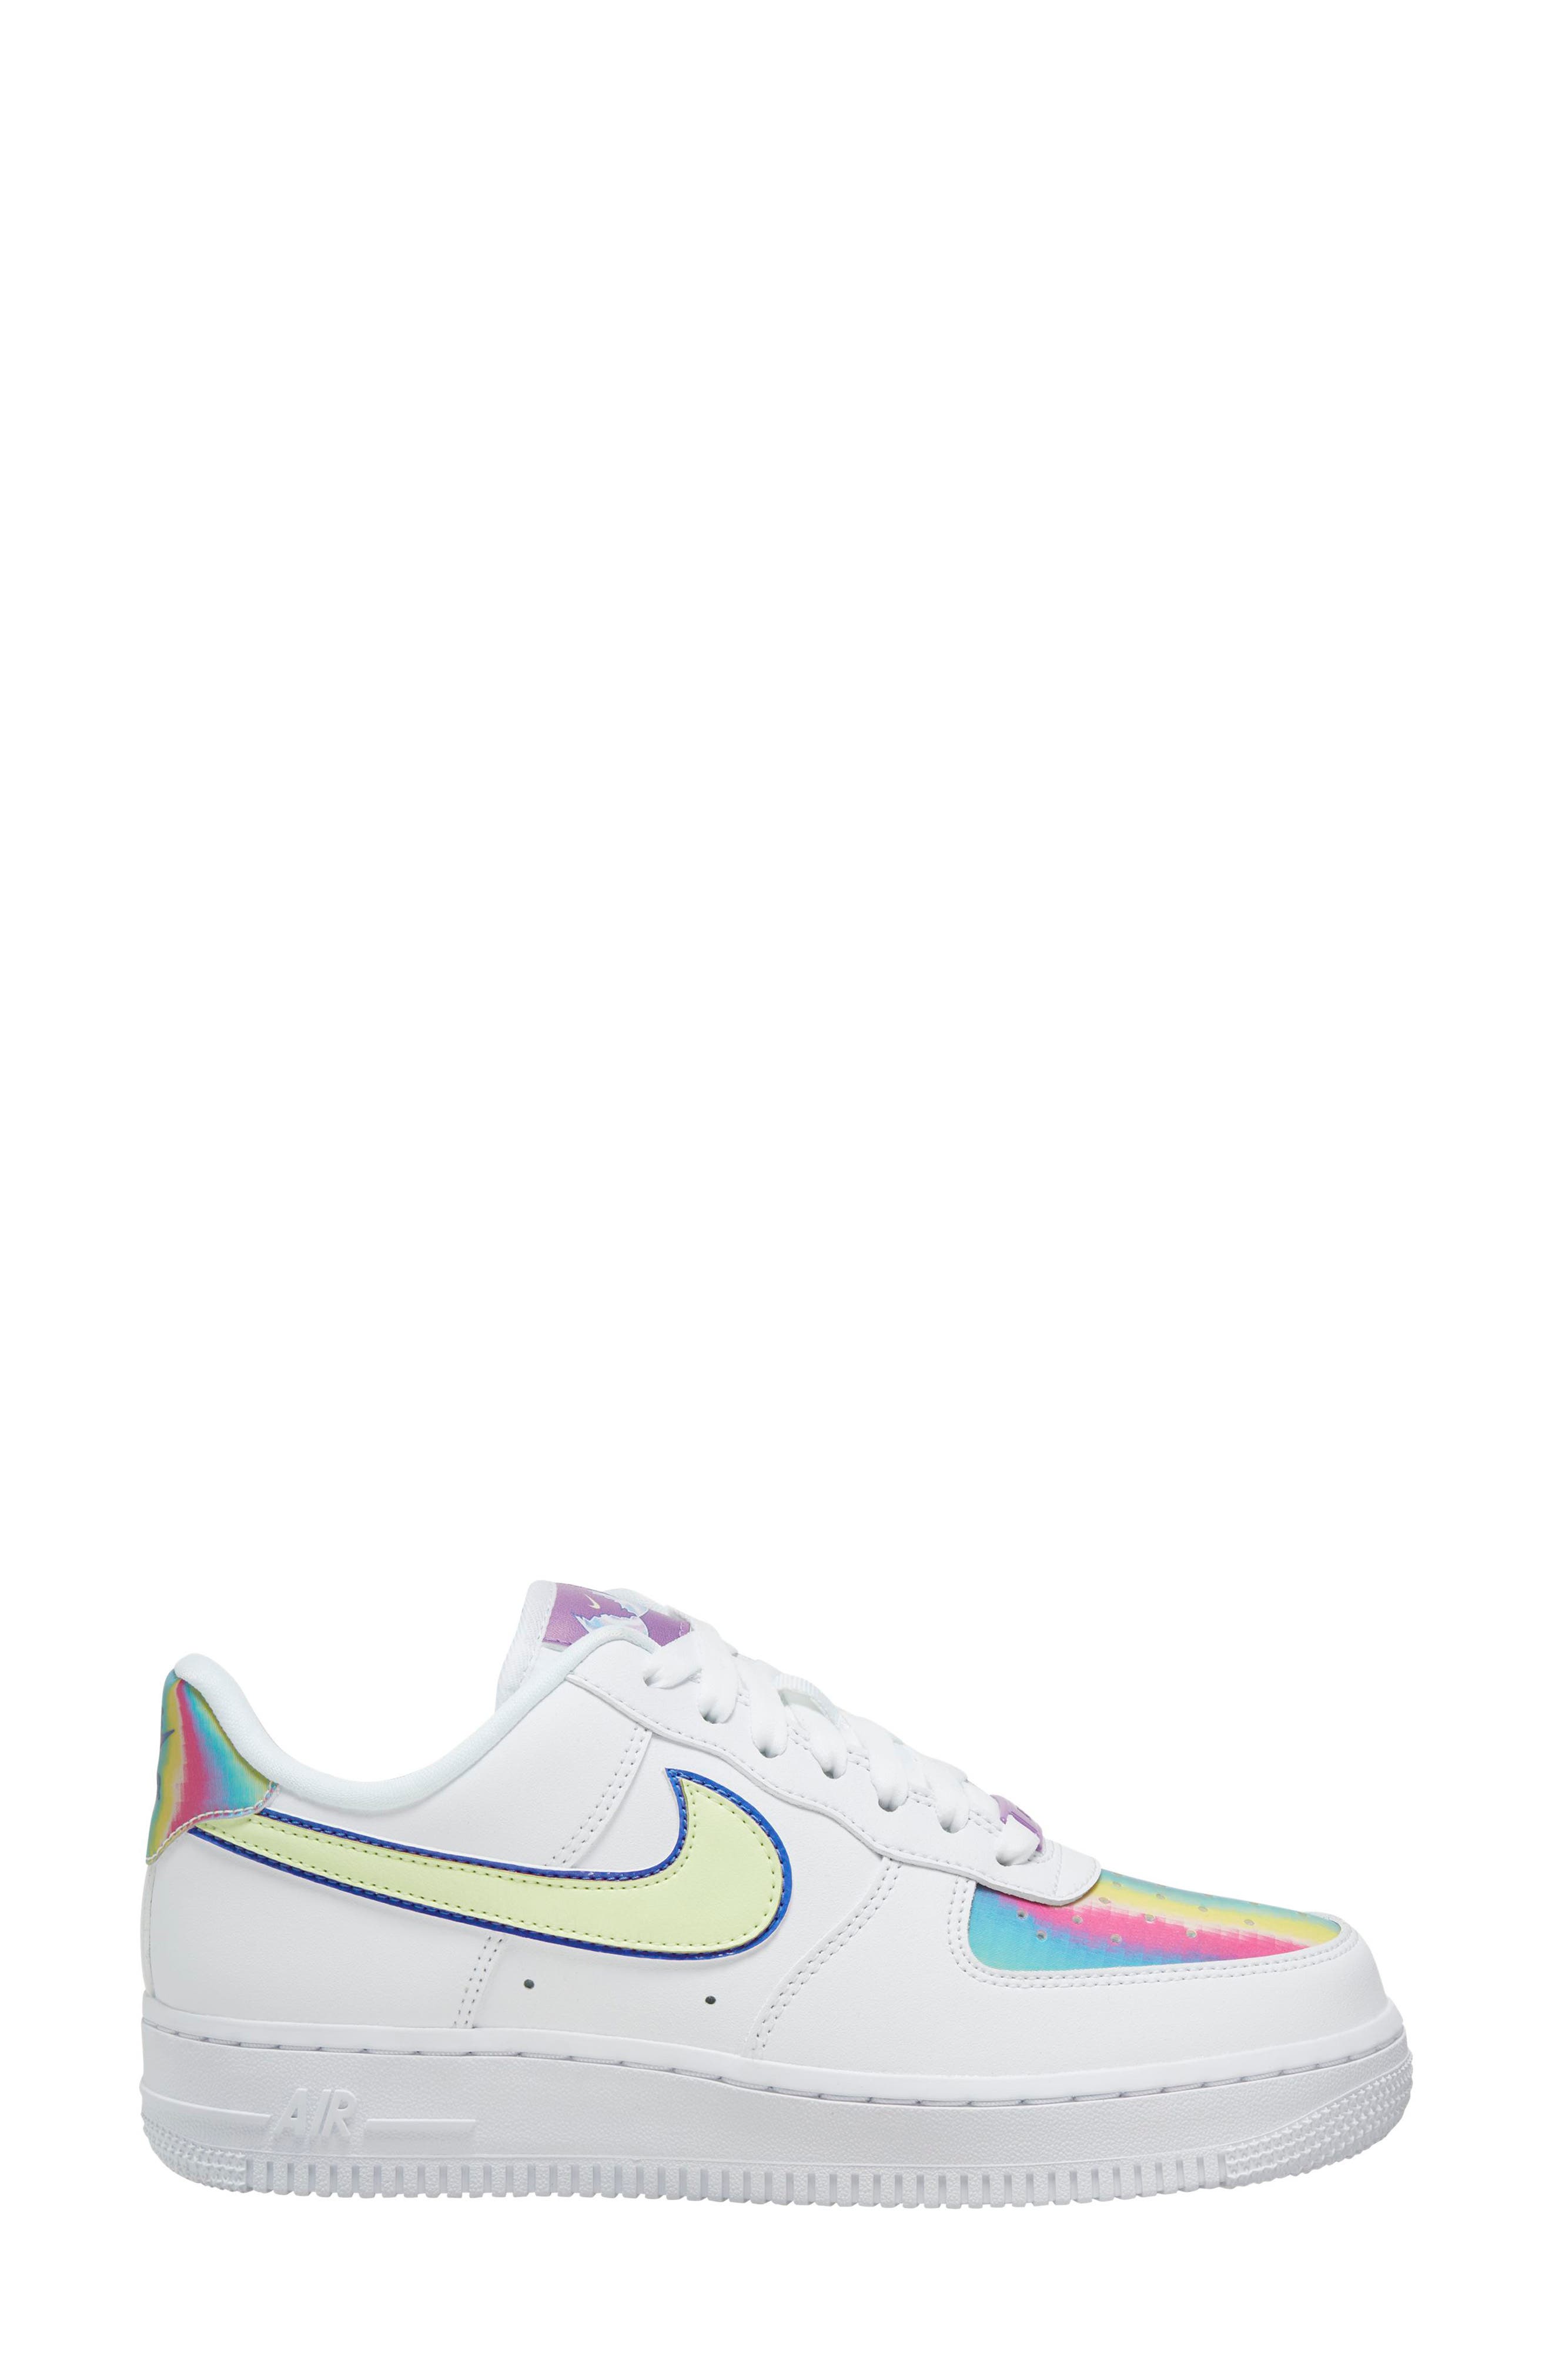 nike easter shoes 219